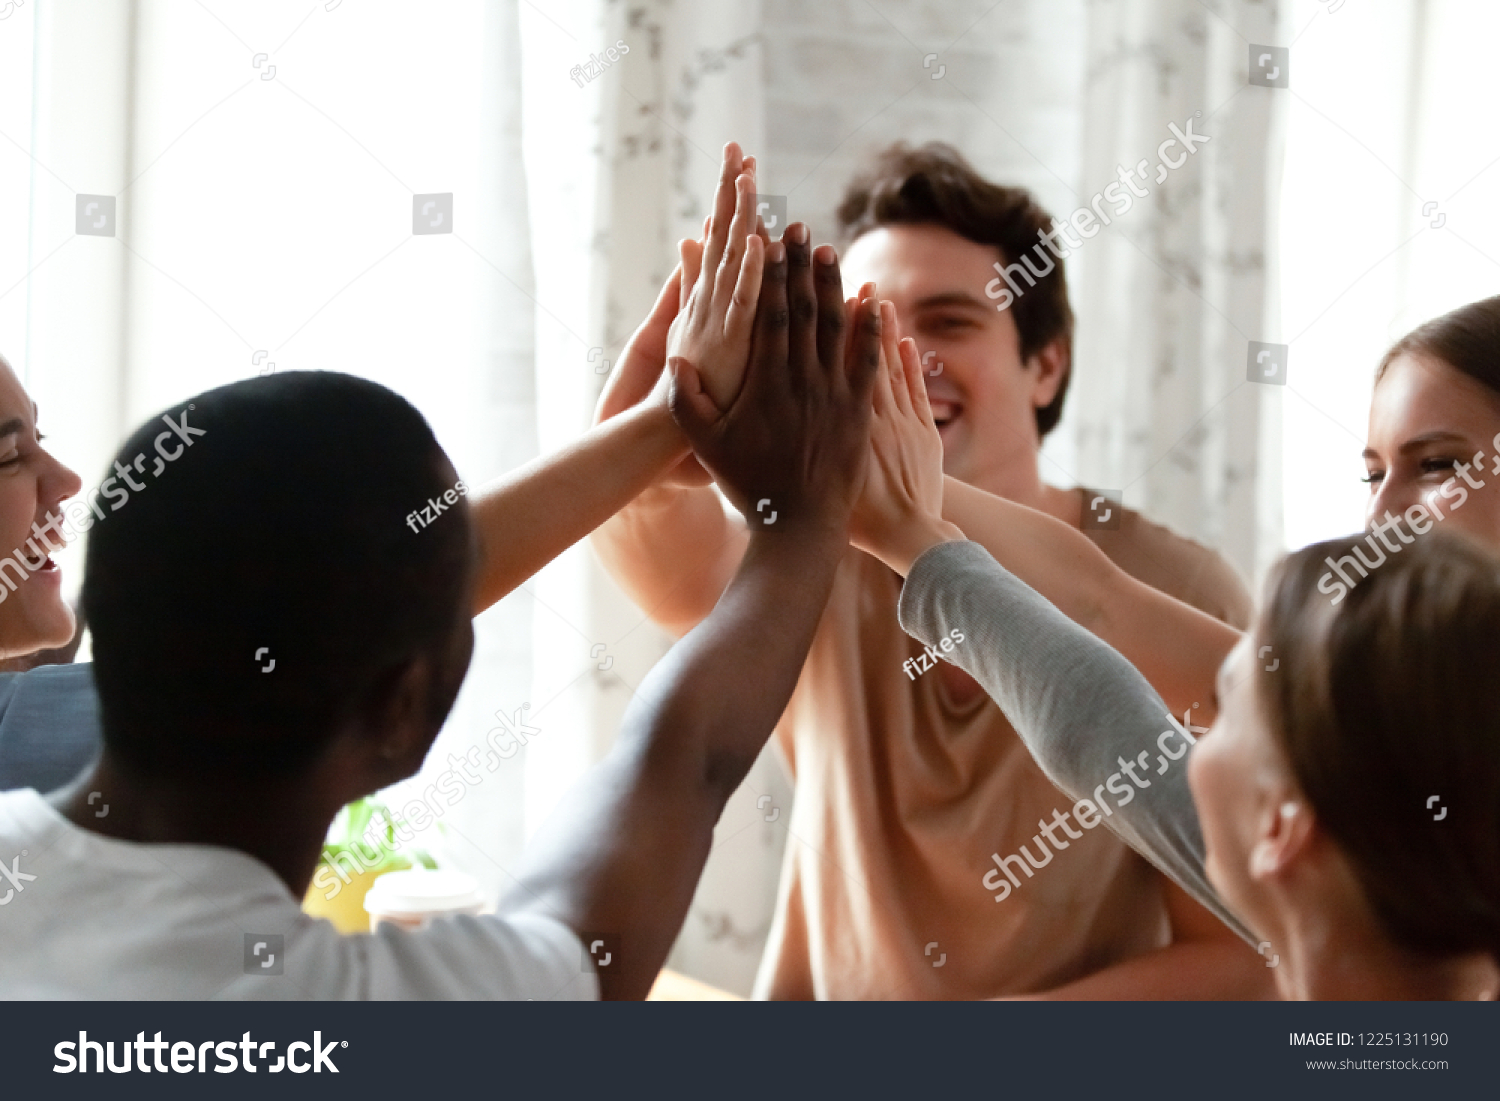 Diverse multiracial cheerful students giving high five greeting each other. Multi-ethnic millennial group of young people slapping palms sitting indoors. Gesture of celebration, friendship and unity #1225131190